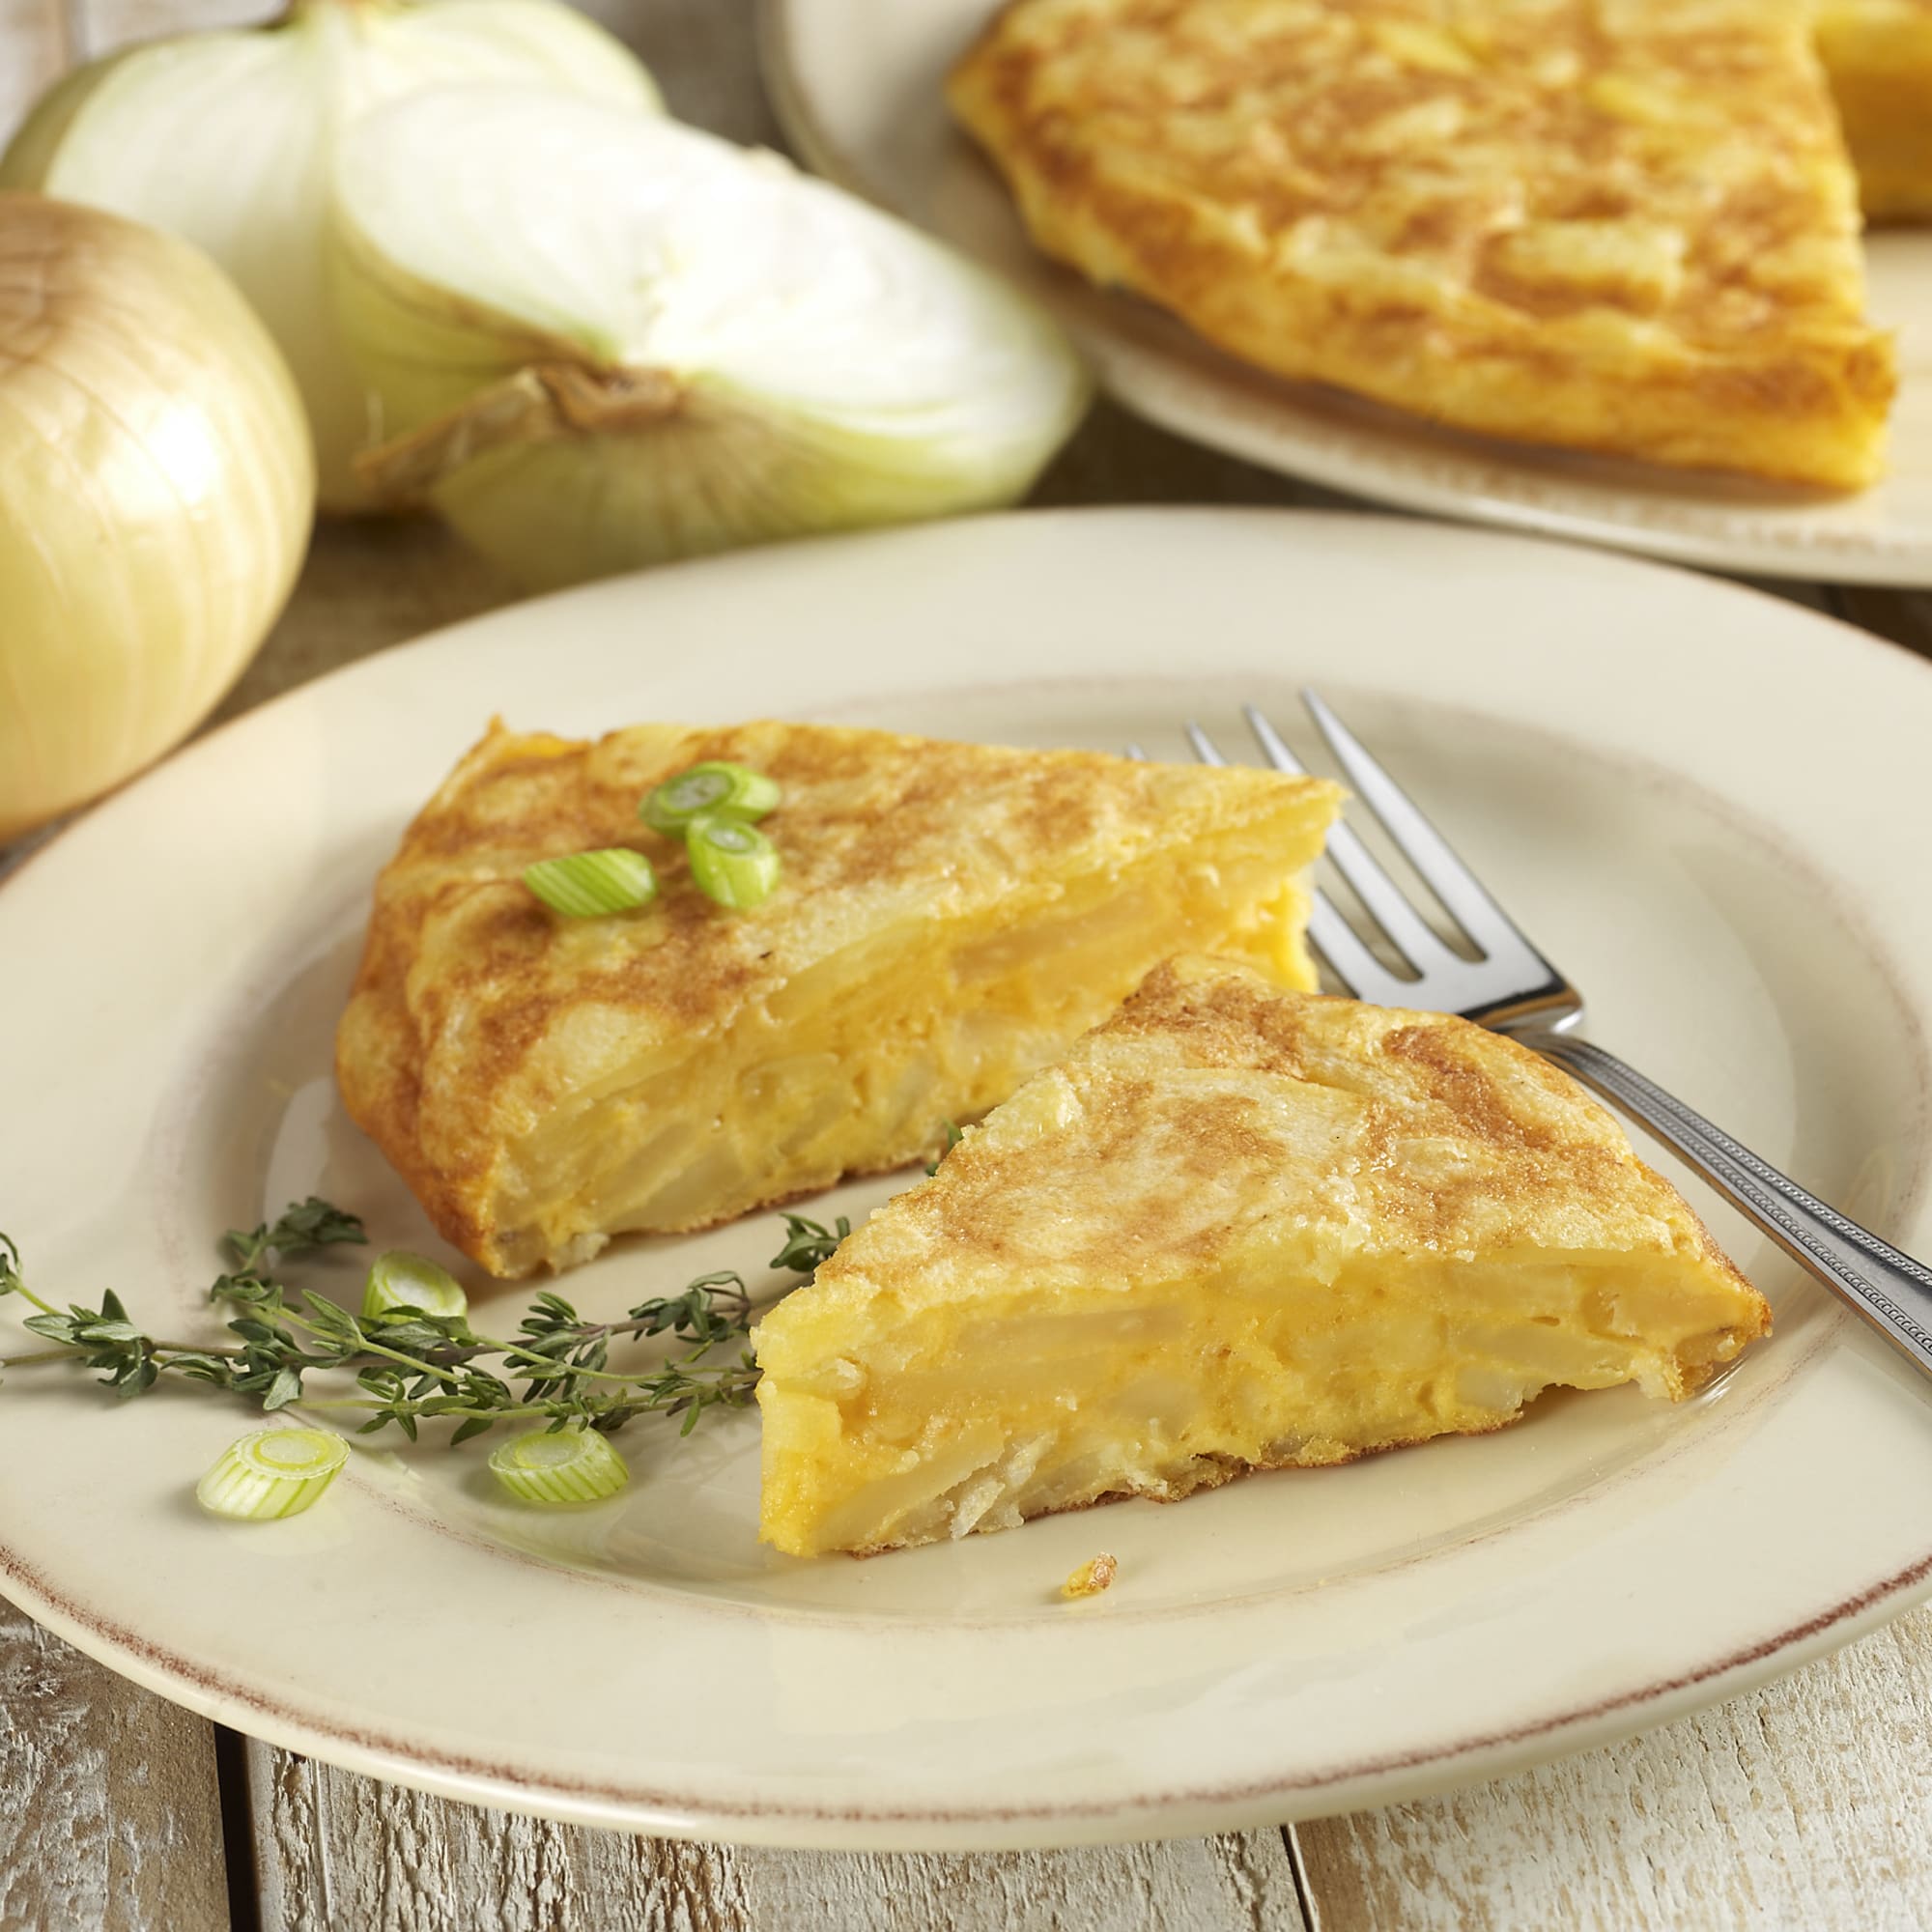 Spanish tortilla omelette pan 11 Imported from Spain